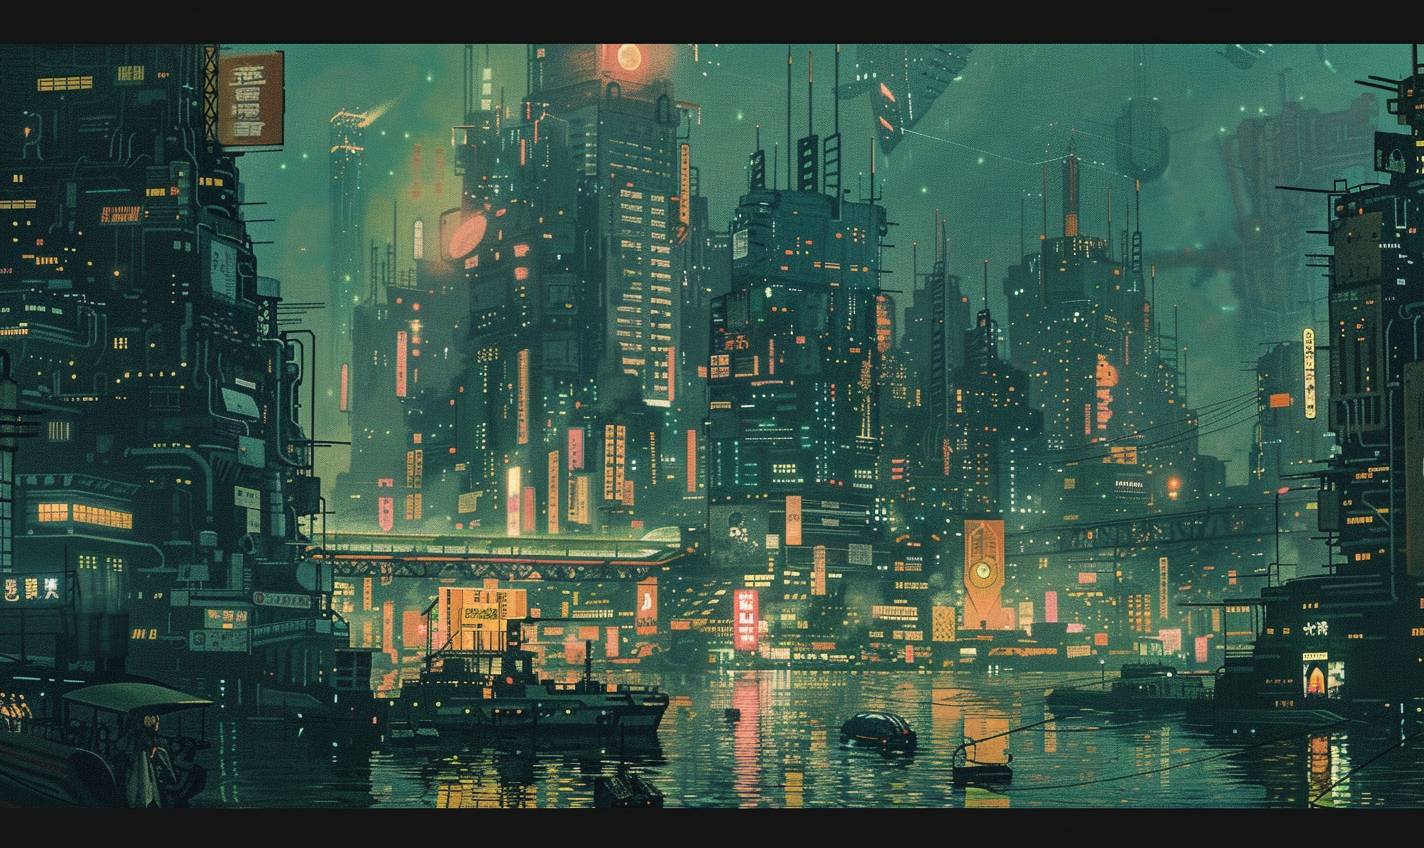 In the style of Ohara Koson, a cybernetic cityscape teeming with artificial life